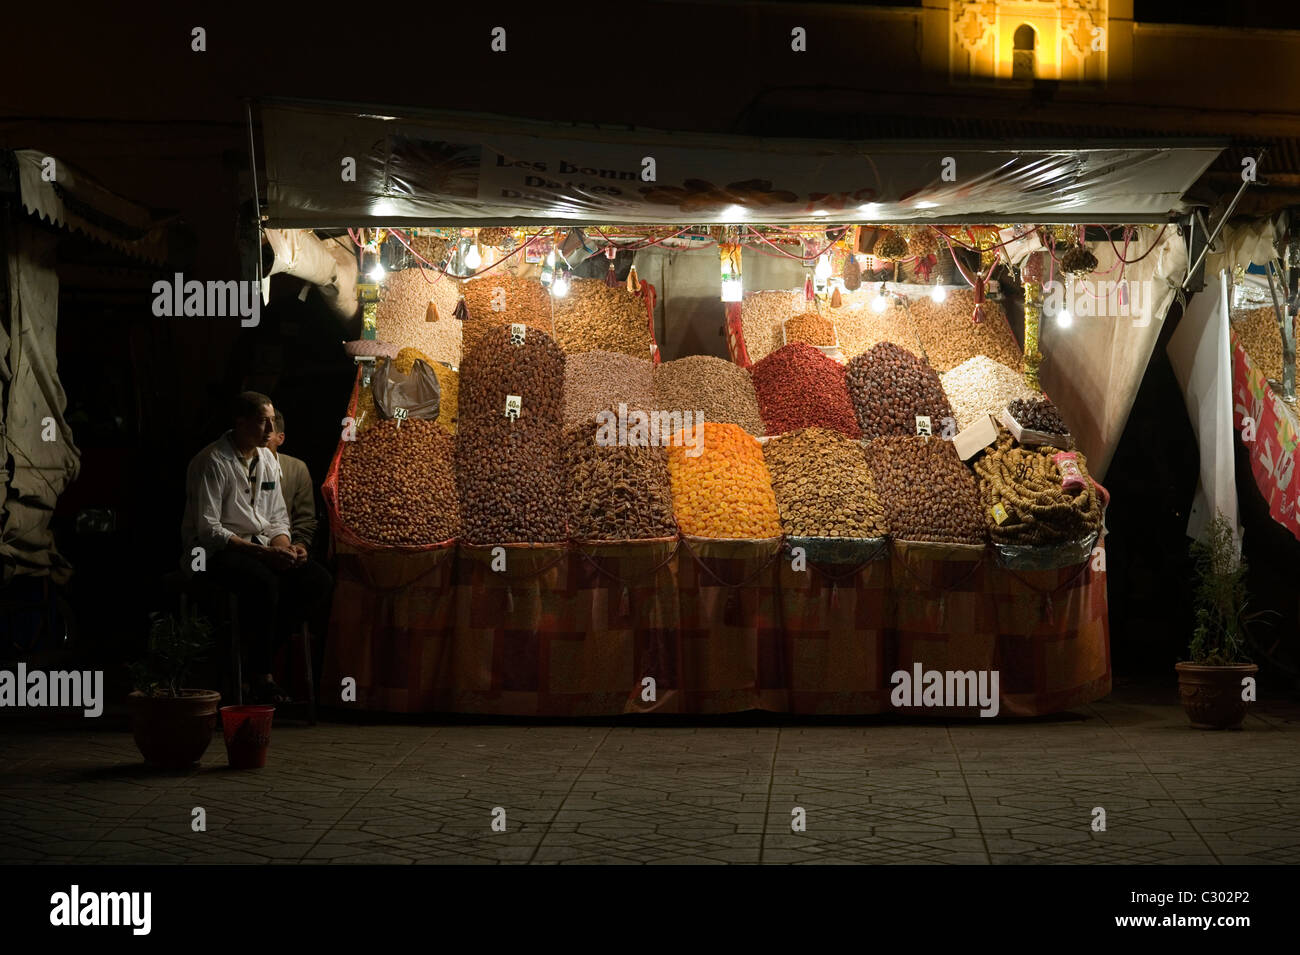 Marrakech, Morocco,15-4-2011.Figs, fruit and nuts fotr sale. Night time activity on the Place Djemma el Fna Stock Photo